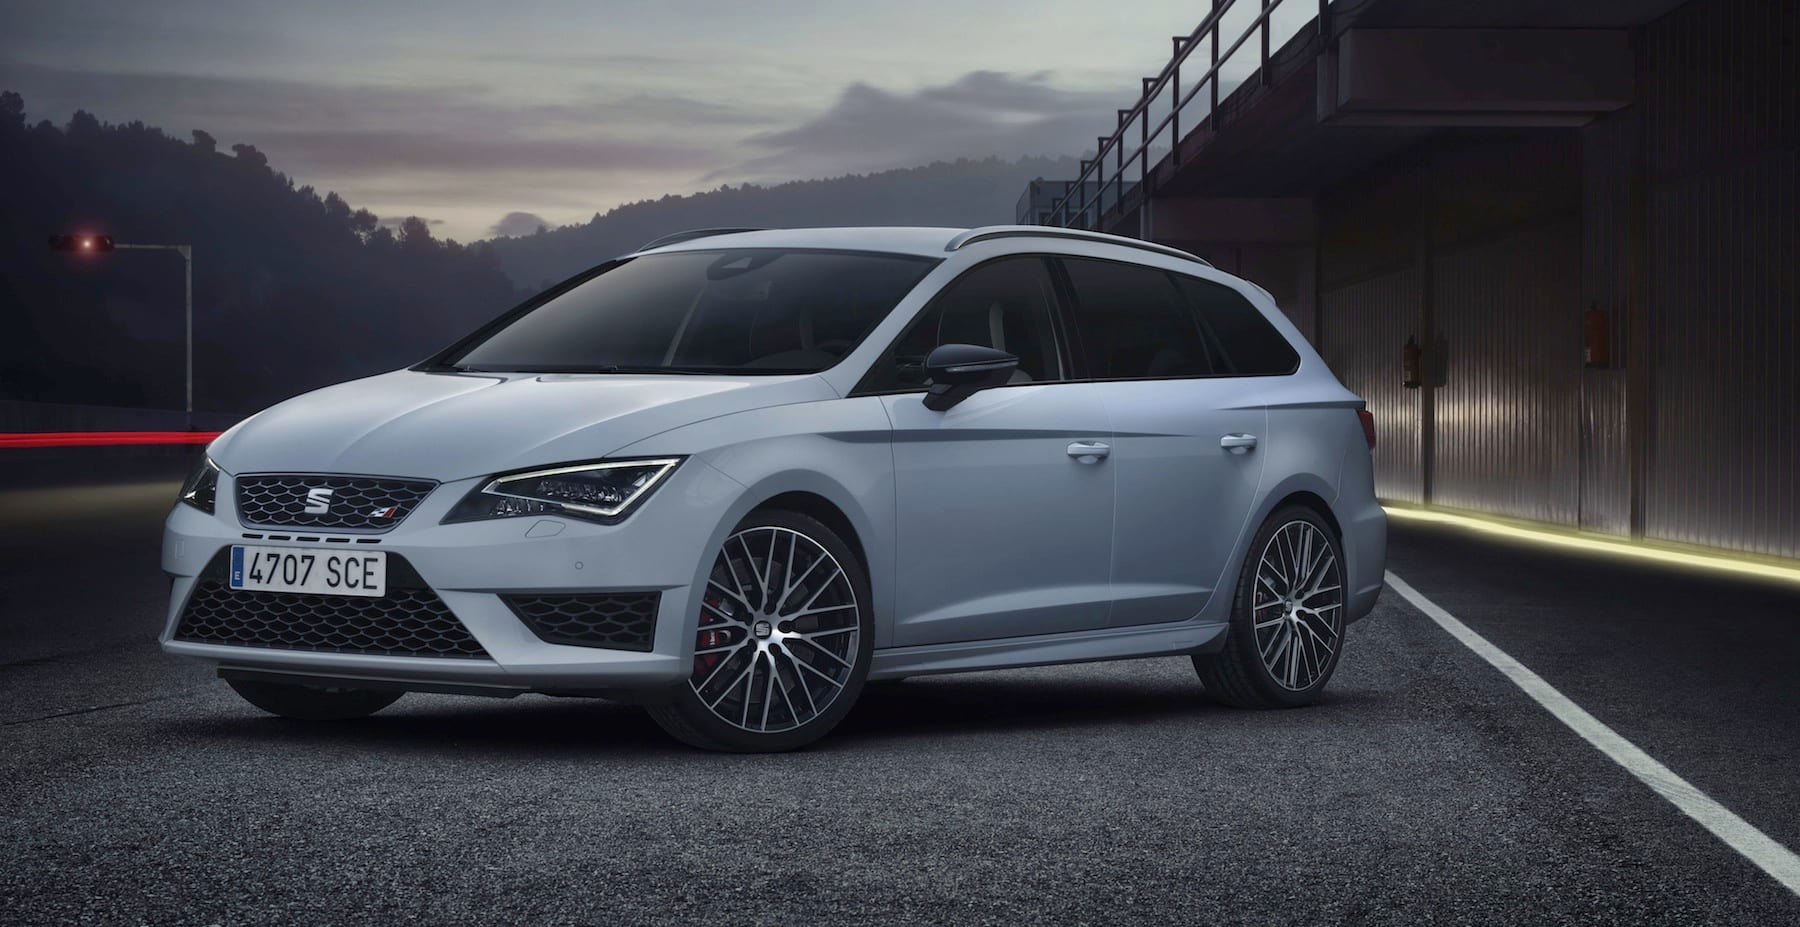 Seat Leon Cupra Is A Speedy Spanish Hatchback In China But Not All